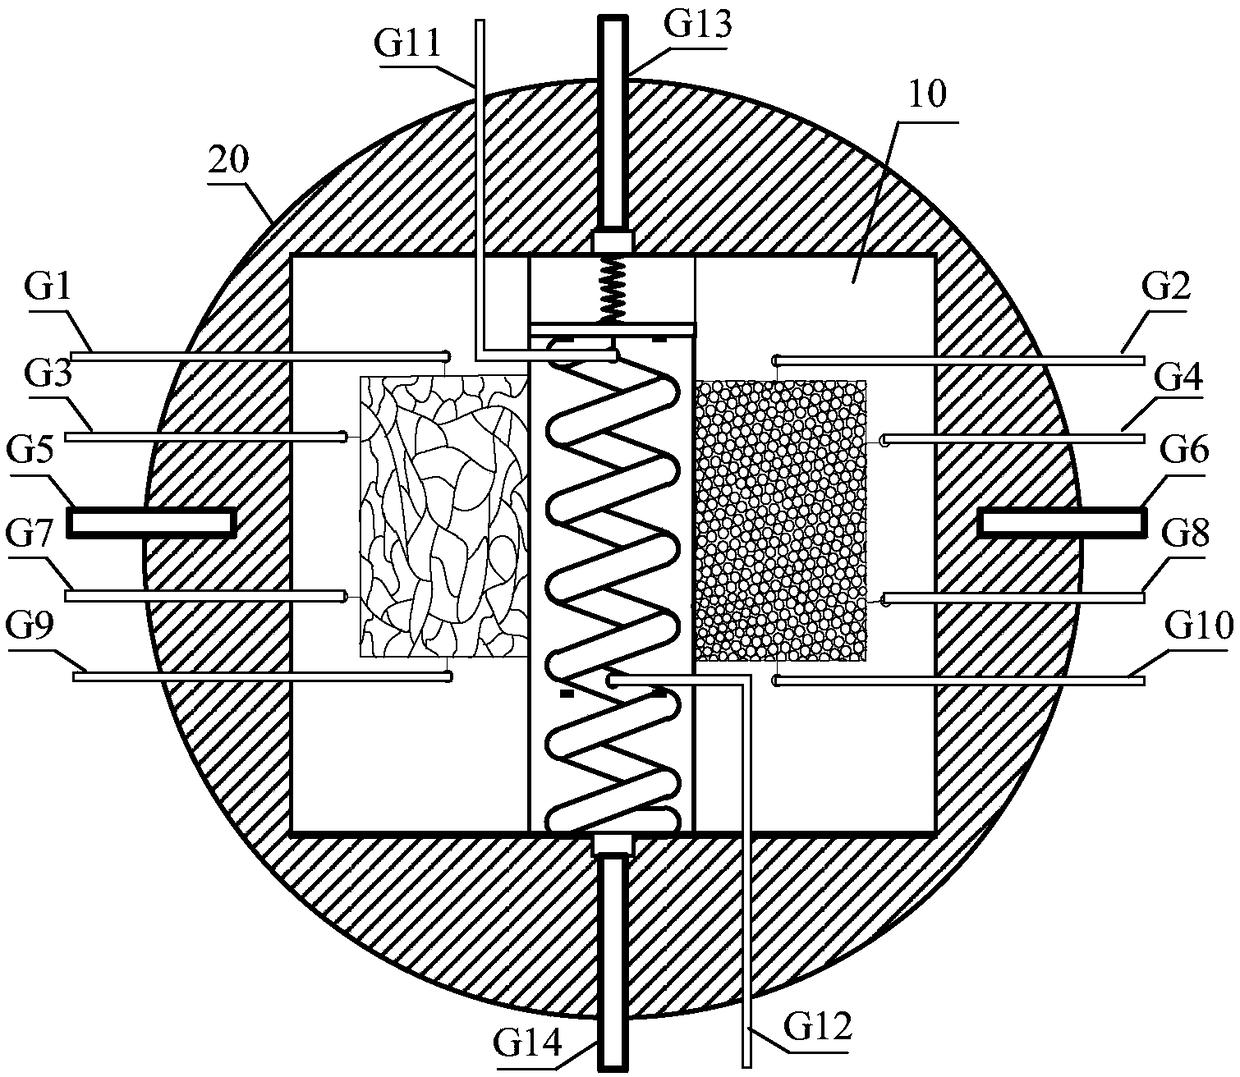 Microscopic simulation device for natural gas hydrate drilling and production